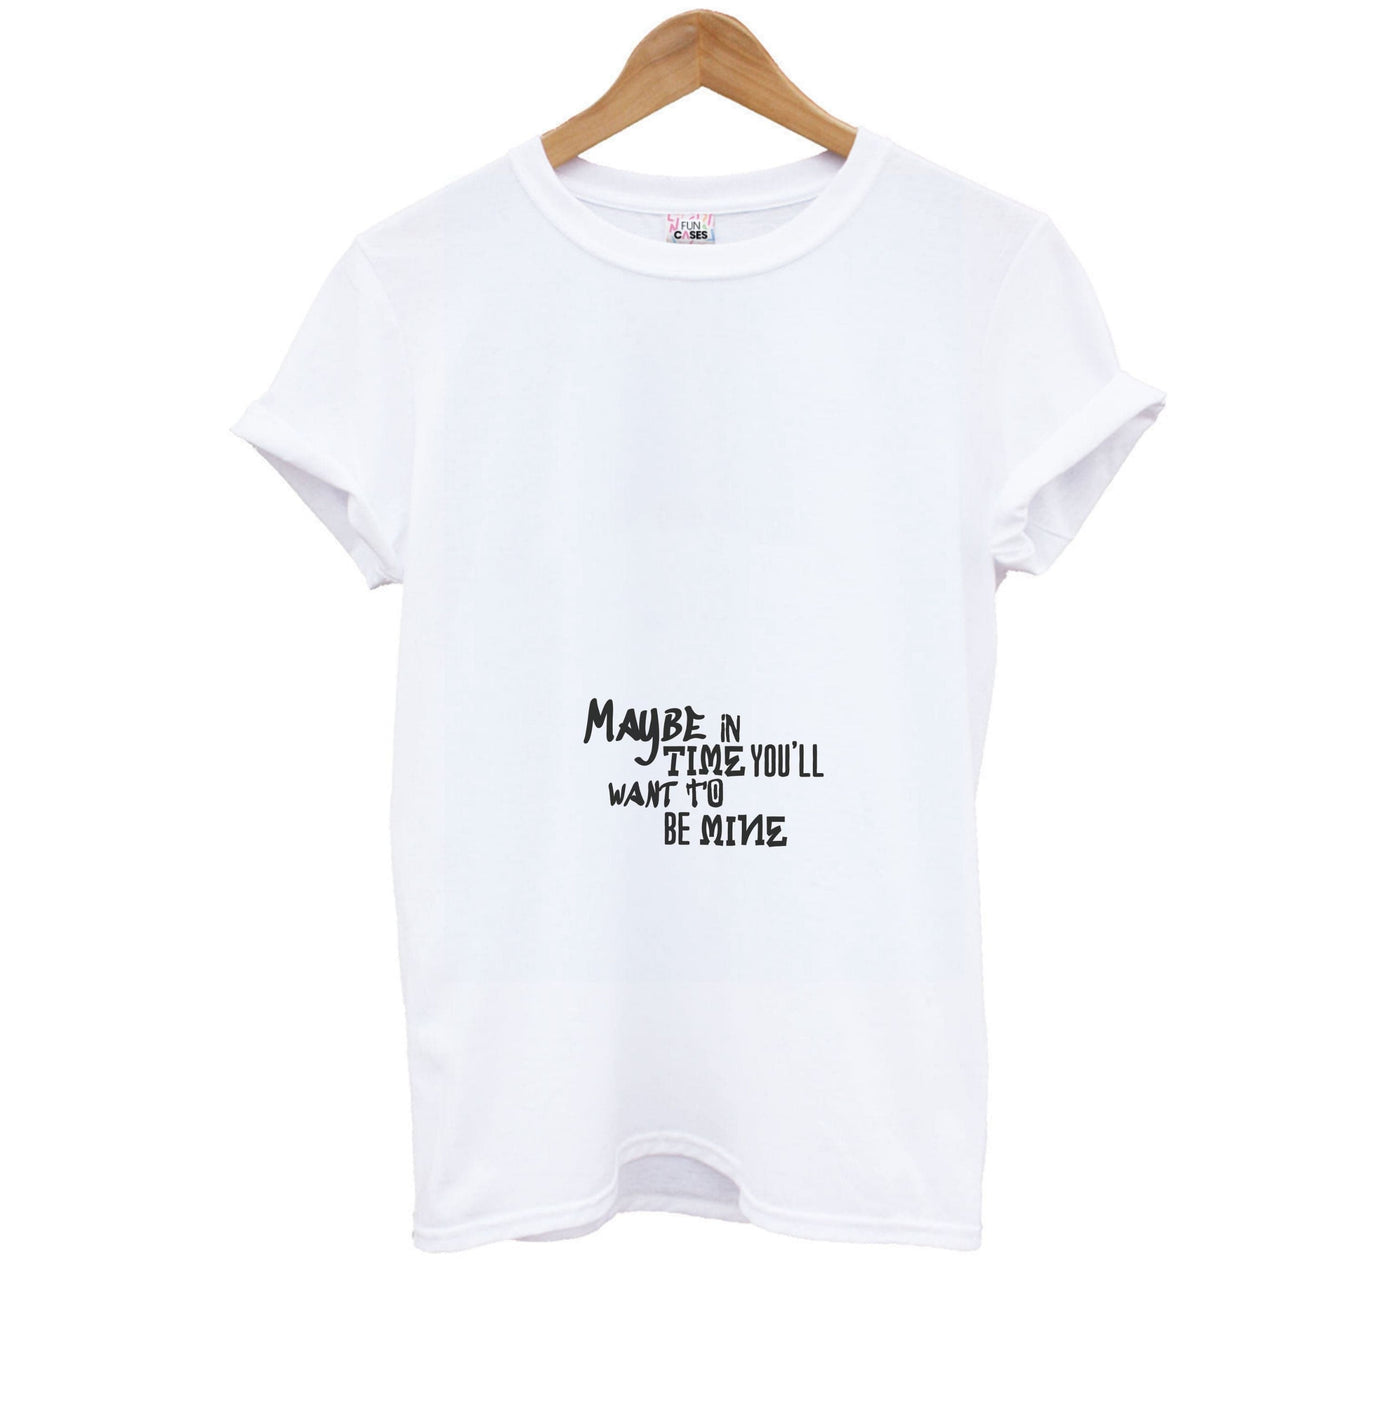 Maybe In Time - Gorillaz Kids T-Shirt